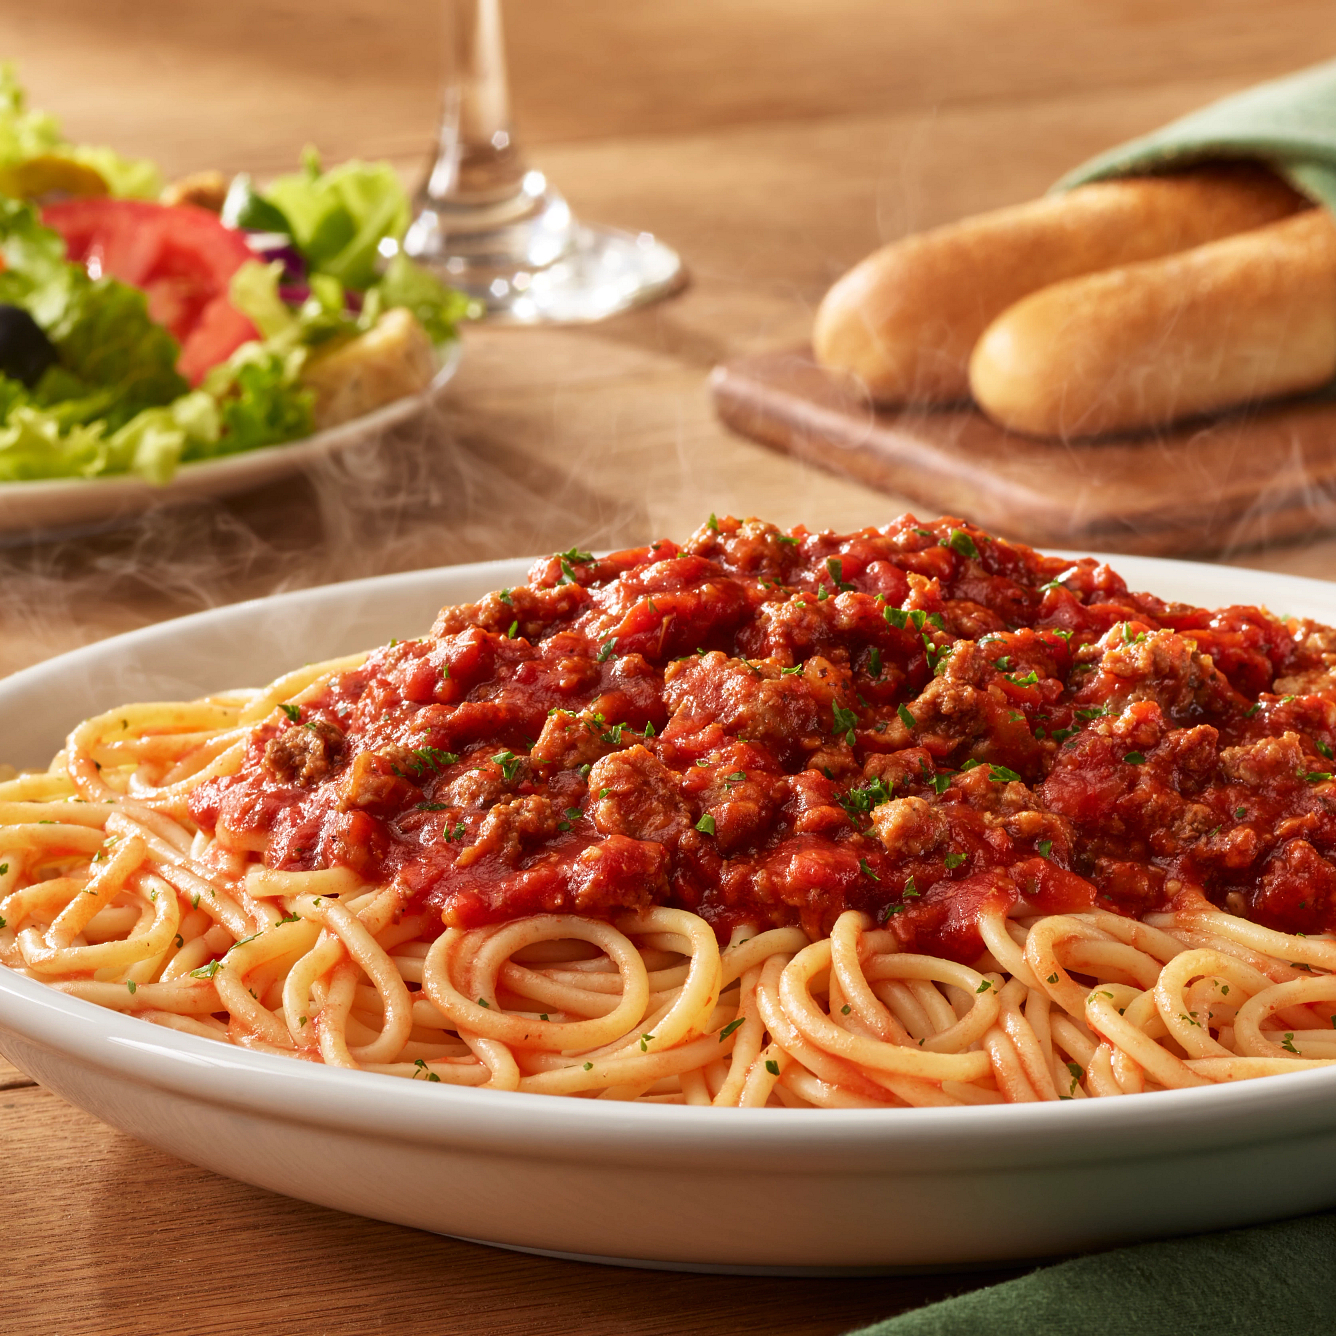 Spaghetti: Topped with your choice of homemade marinara or meat sauce prepared fresh daily. Olive Garden Italian Restaurant Albuquerque (505)881-8425